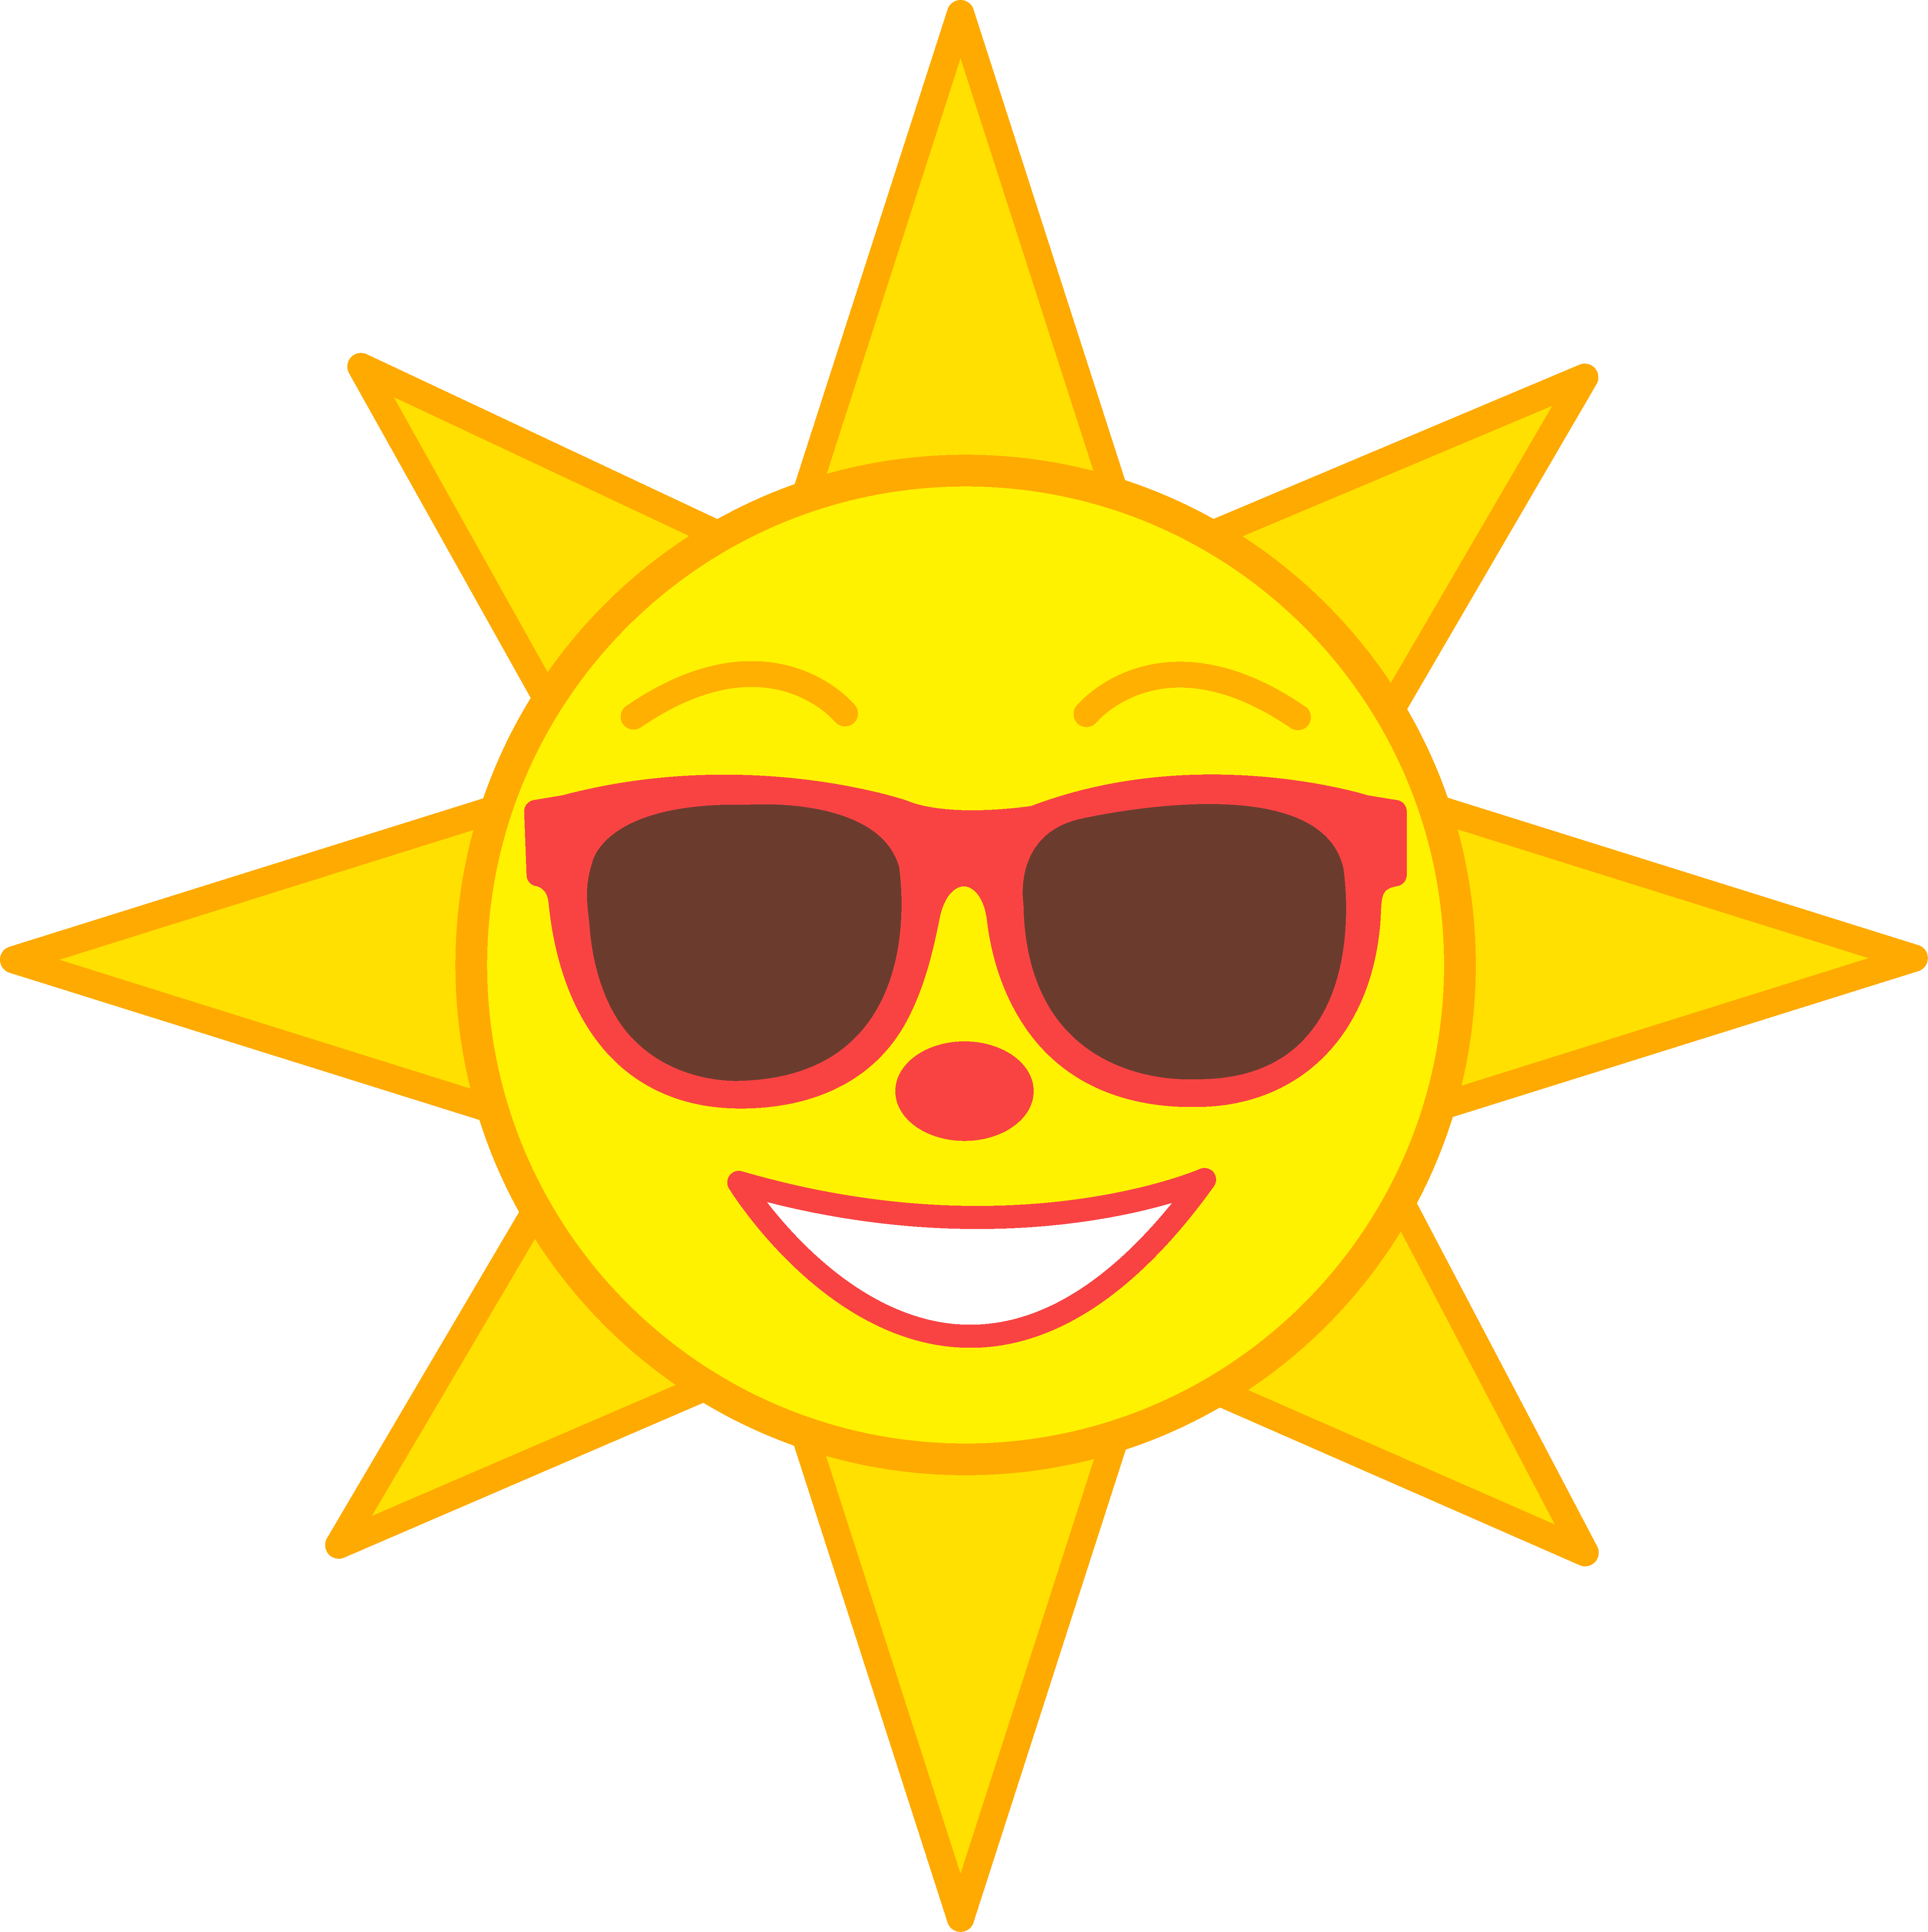 Download this Sun Happy Clip Art collection picture, image, photo and wallpaper for free that are delivered in high definition, 570x570 Pixel.